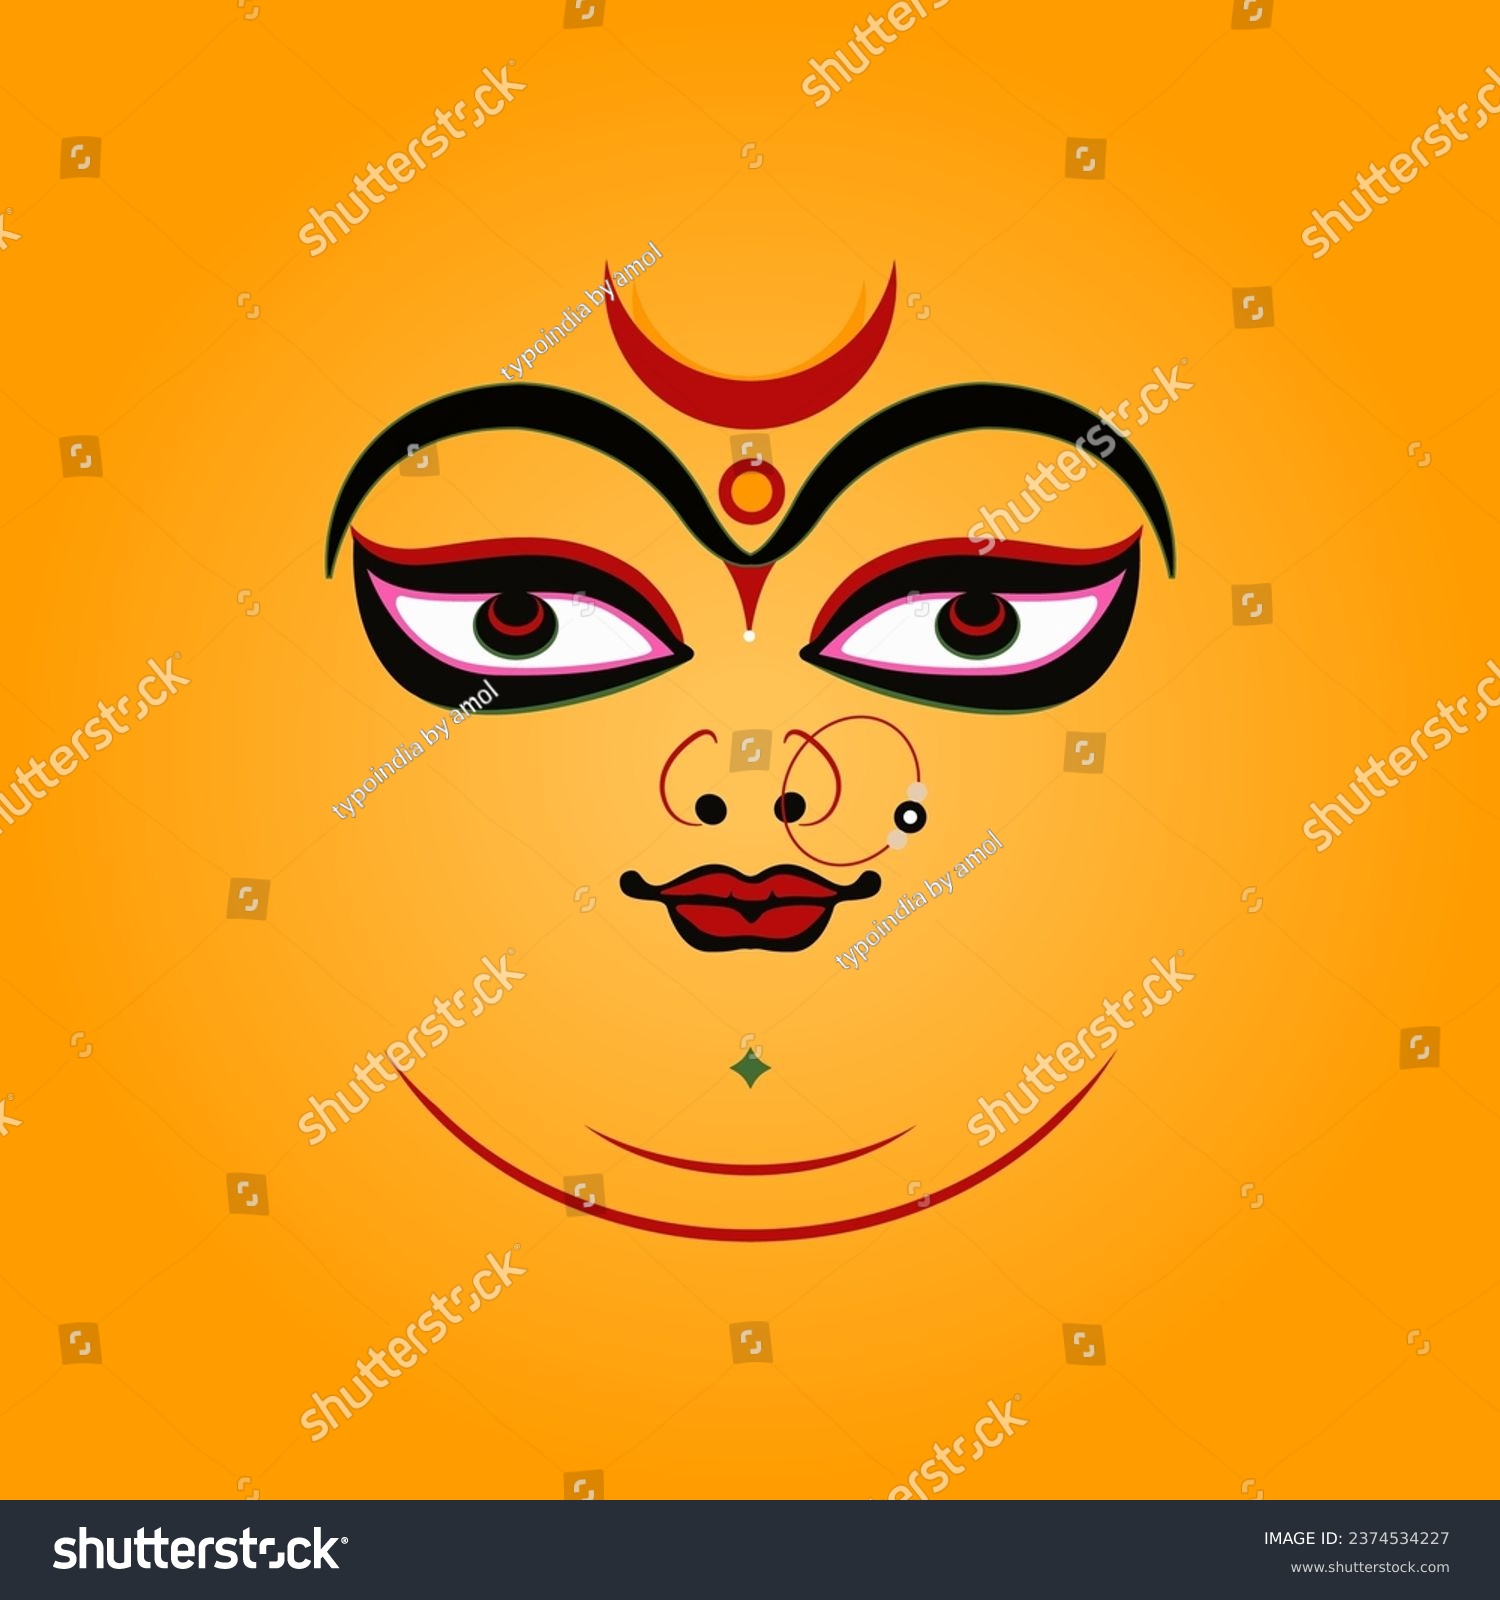 SVG of Lord Durga's happy face vector illustration. svg